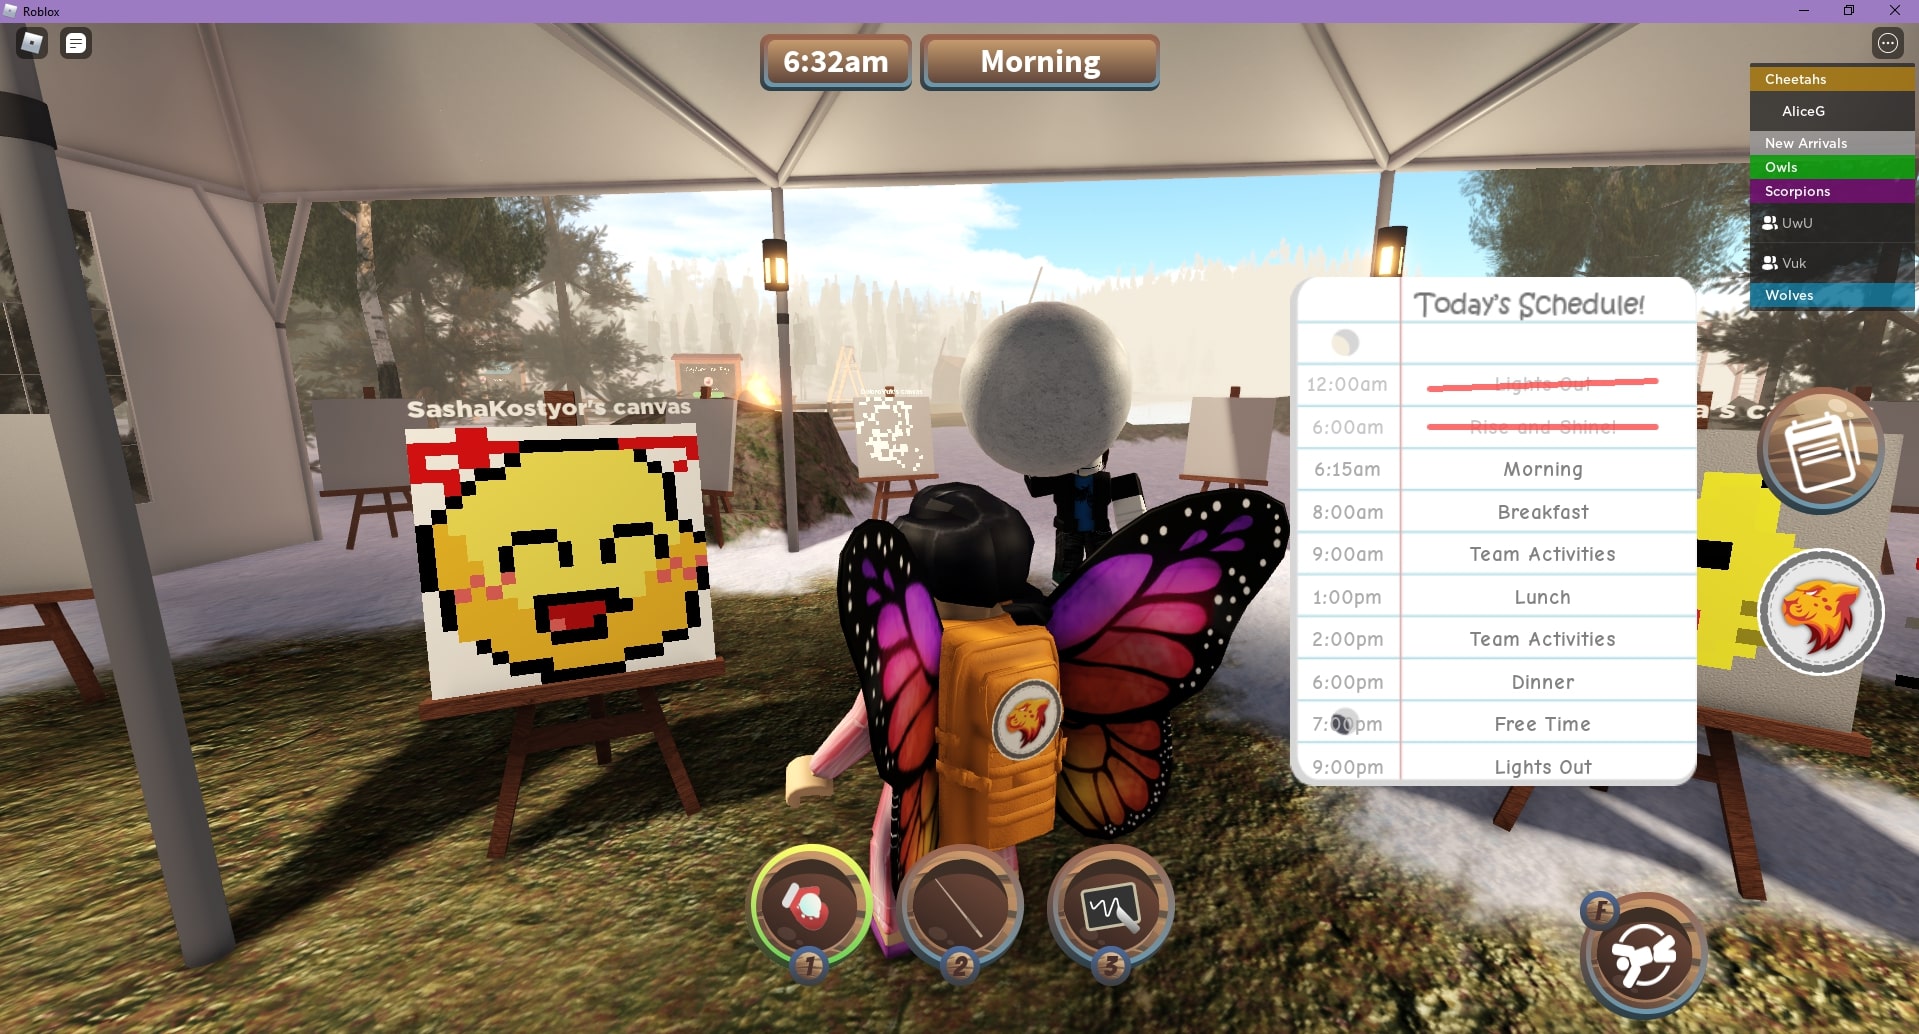 Using Roblox with Young Learners to Practice all 4 Language and